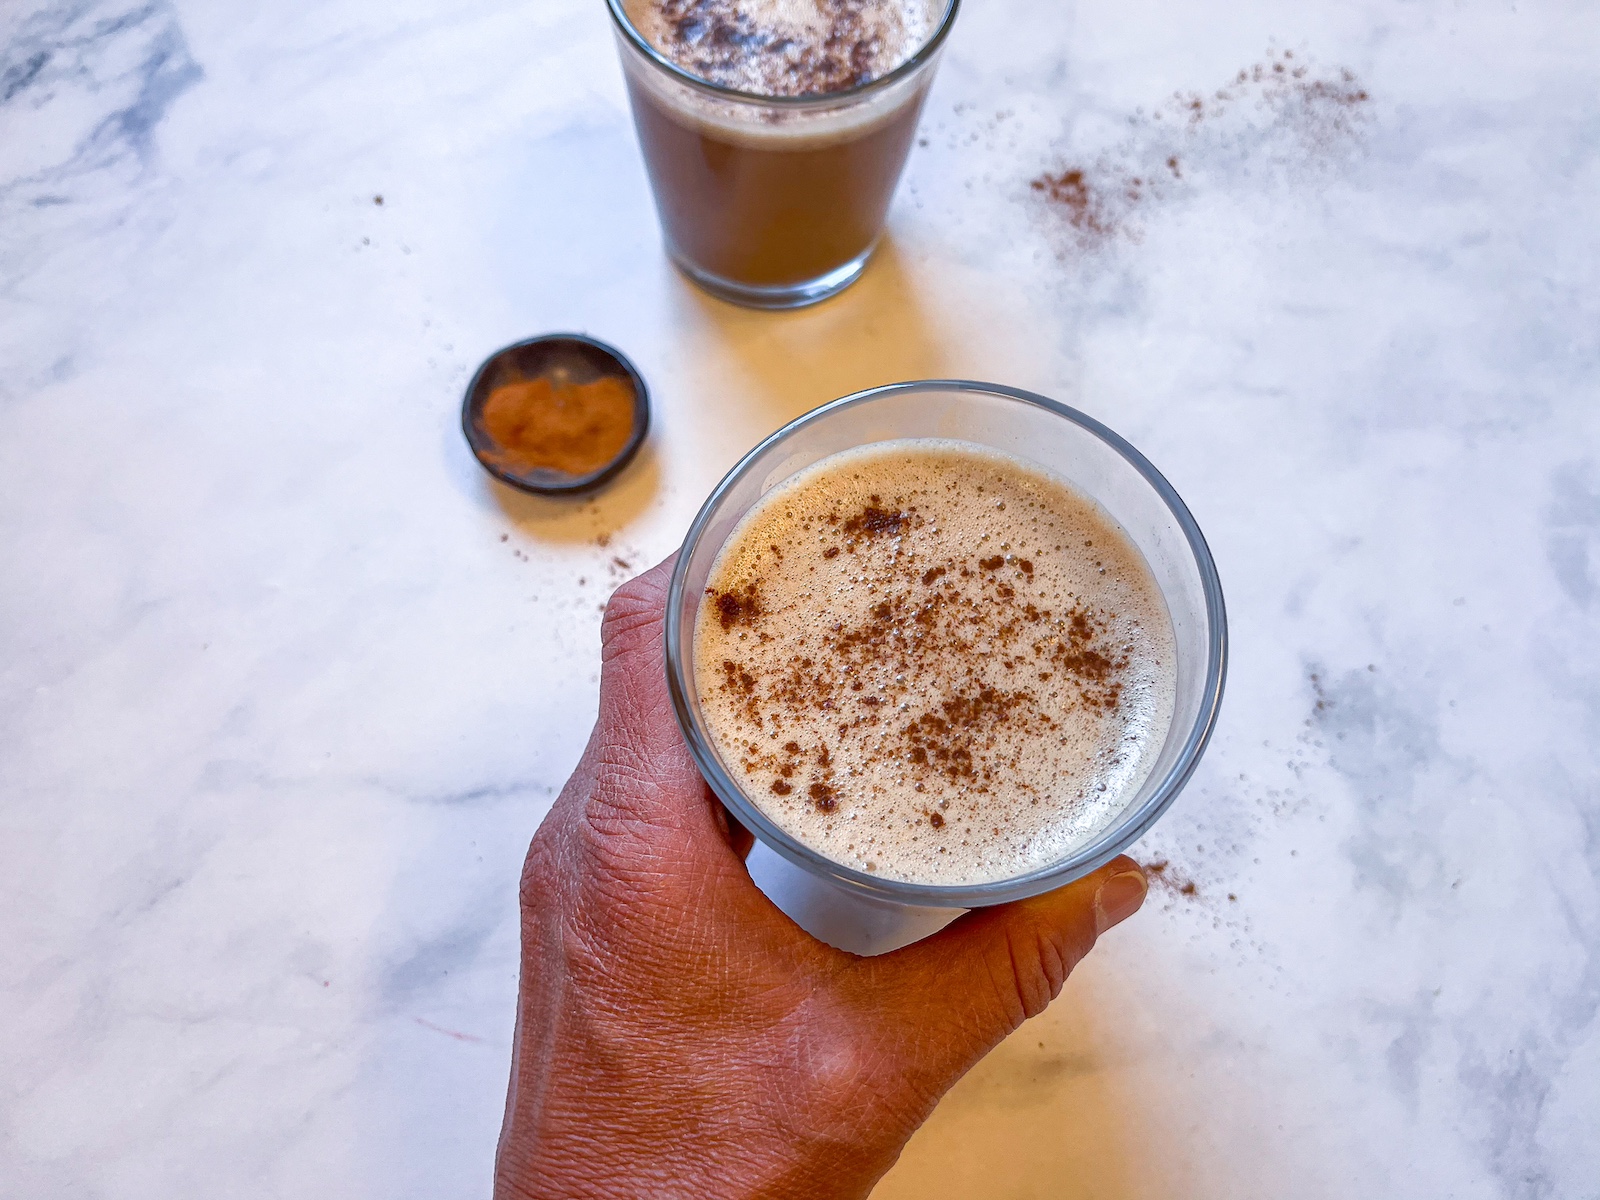 Cacao reishi latte in a glass with a hand around it.